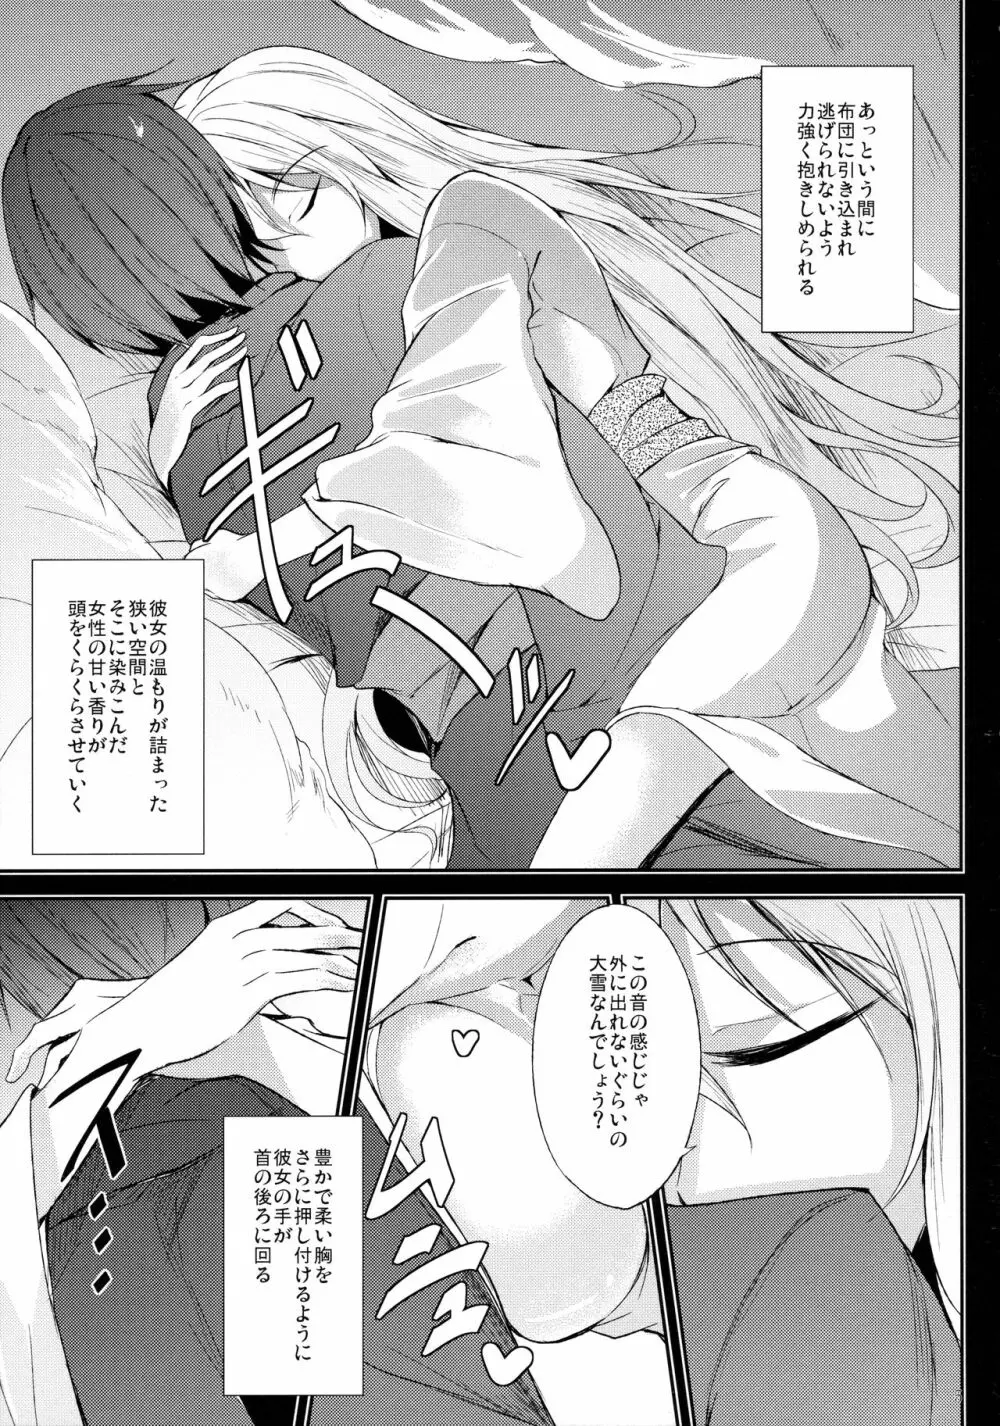 (C89) [みどりねこ (みどり)] 睦言 -ムツミゴト- ・参 (東方Project) - page6